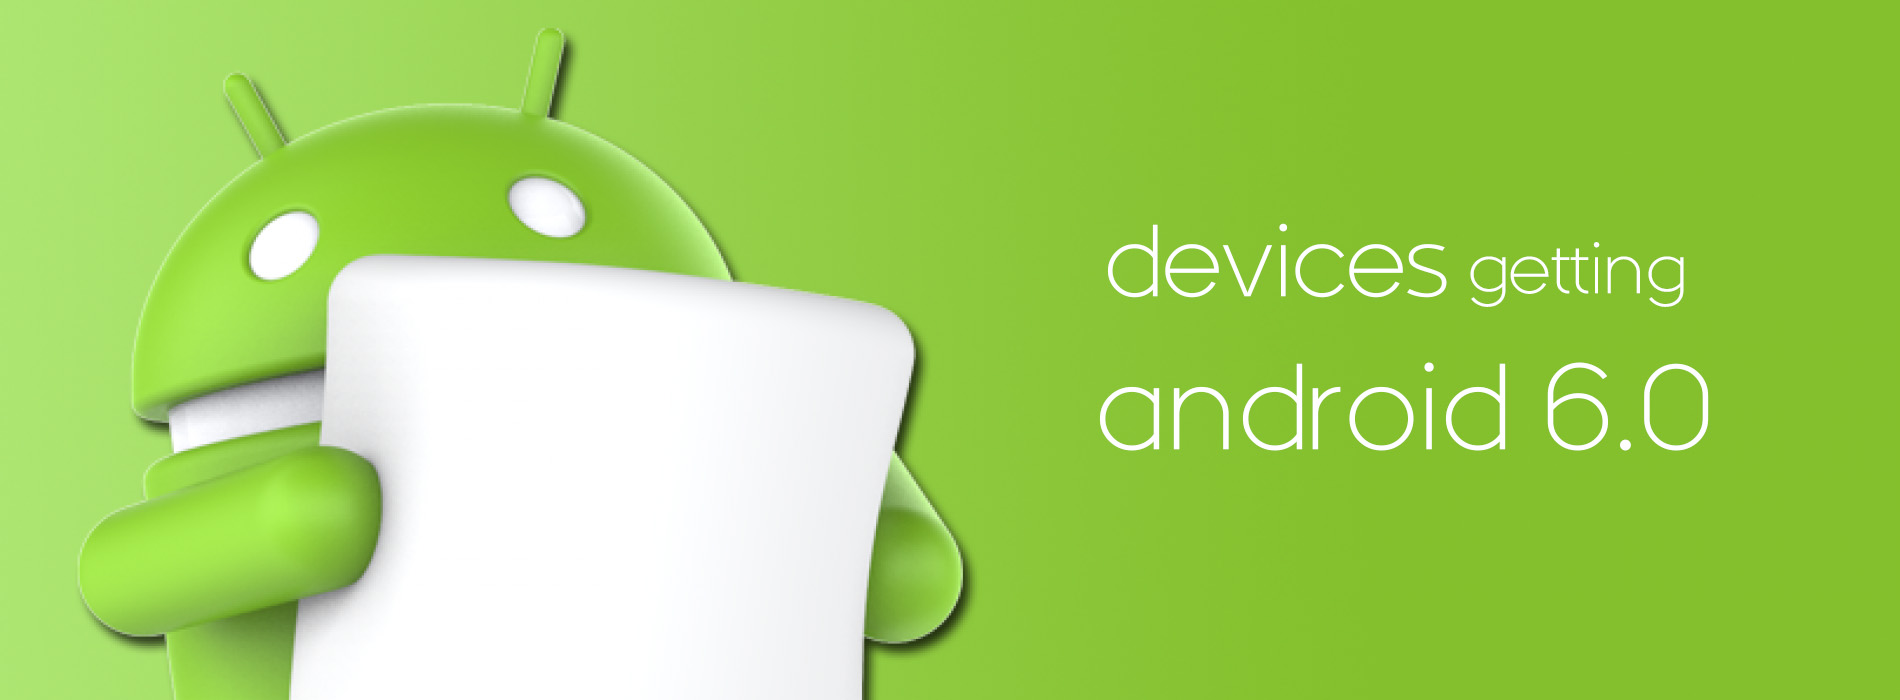 Says device. Android Marshmallow. Android 6 Marshmallow. 6.0 Marshmallow. Android 6.0 Marshmallow logo.